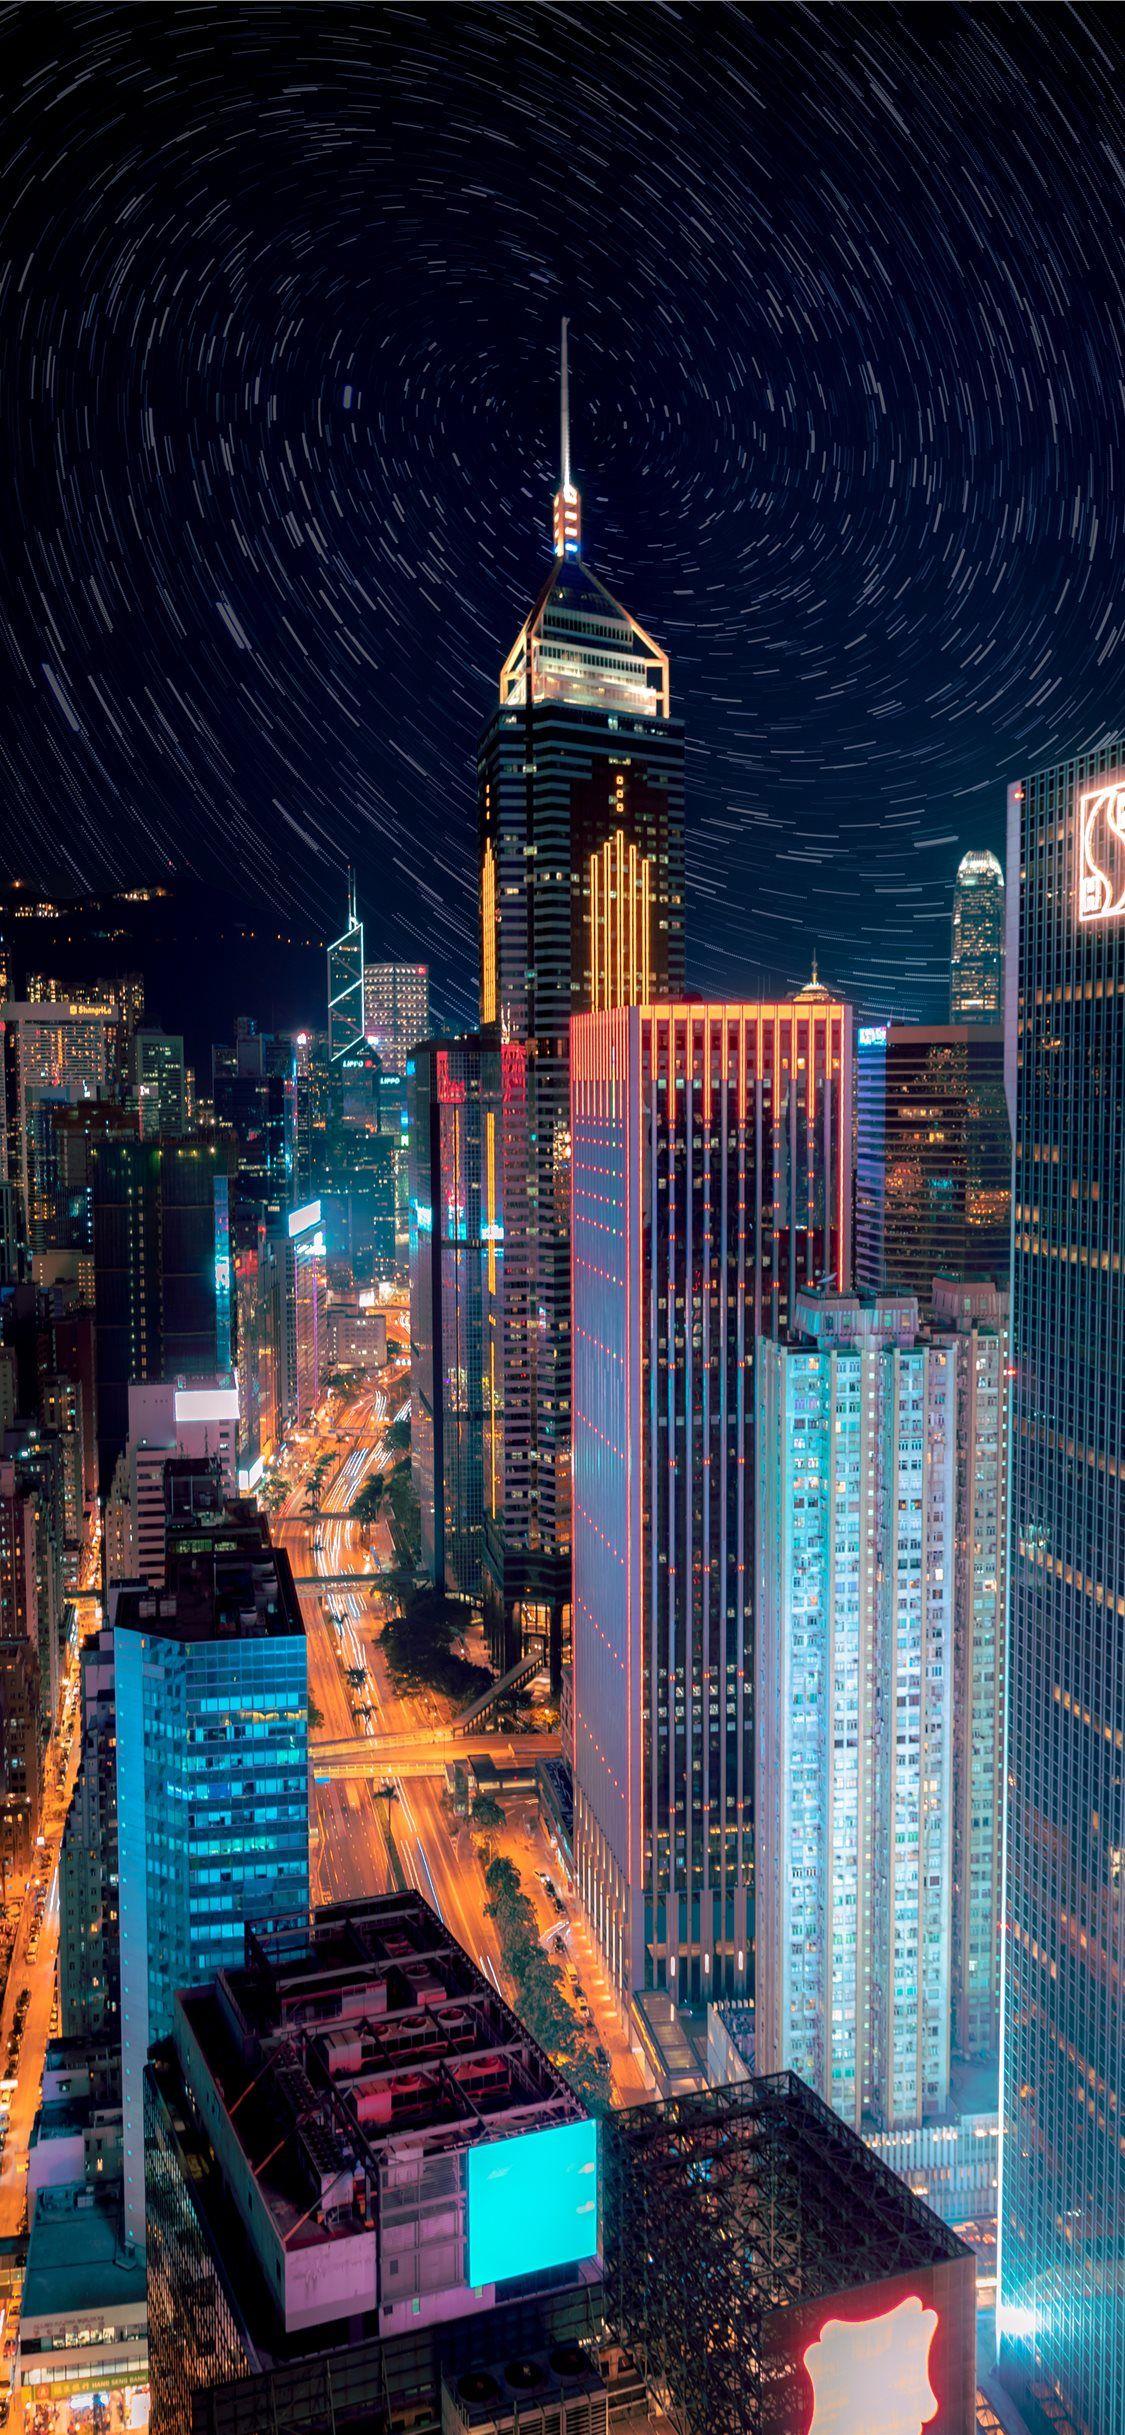 New York City During Nighttime Wallpaper Background